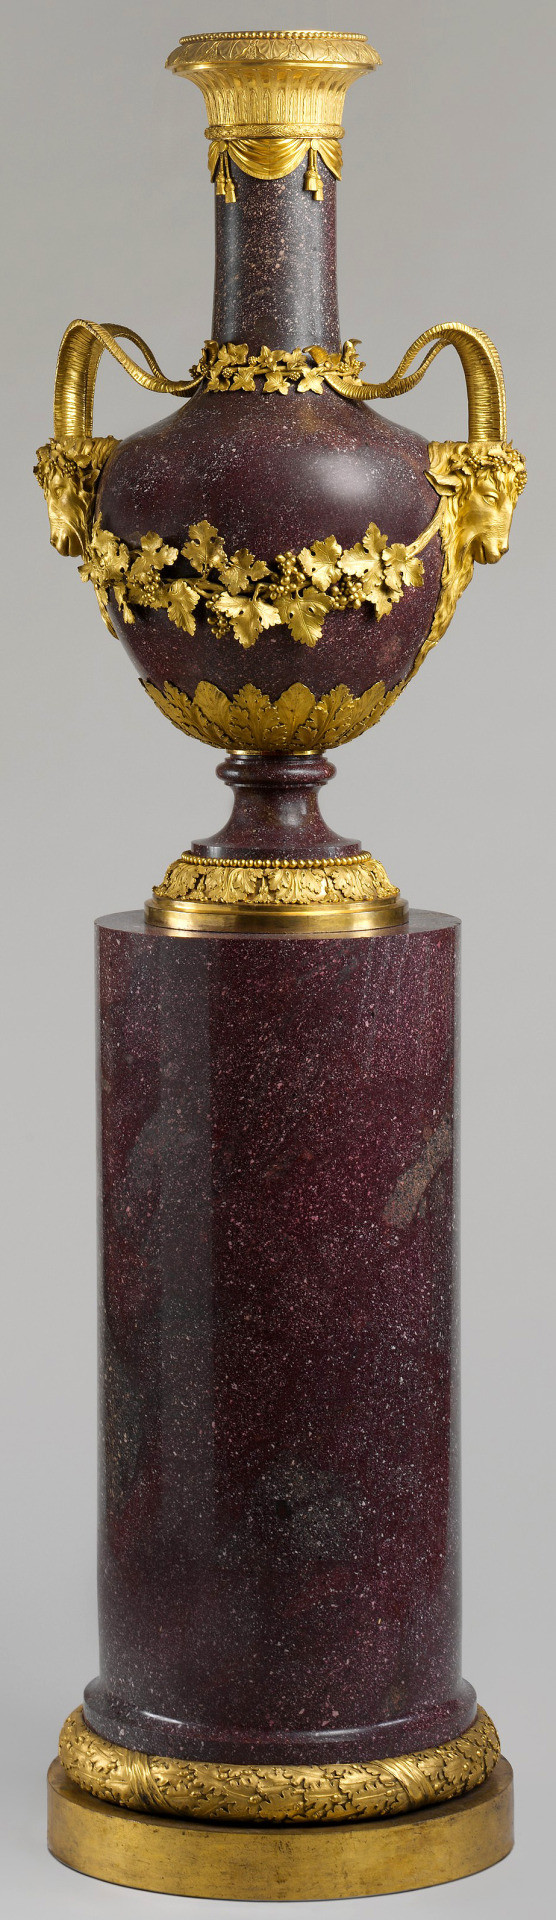 29 Lovely Marble Vase Stand 2024 free download marble vase stand of porphyry vase and stand with gilt bronze mounts neoclassique l with porphyry vase and stand with gilt bronze mounts franac2a7ois joseph belanger design augustin bocciard